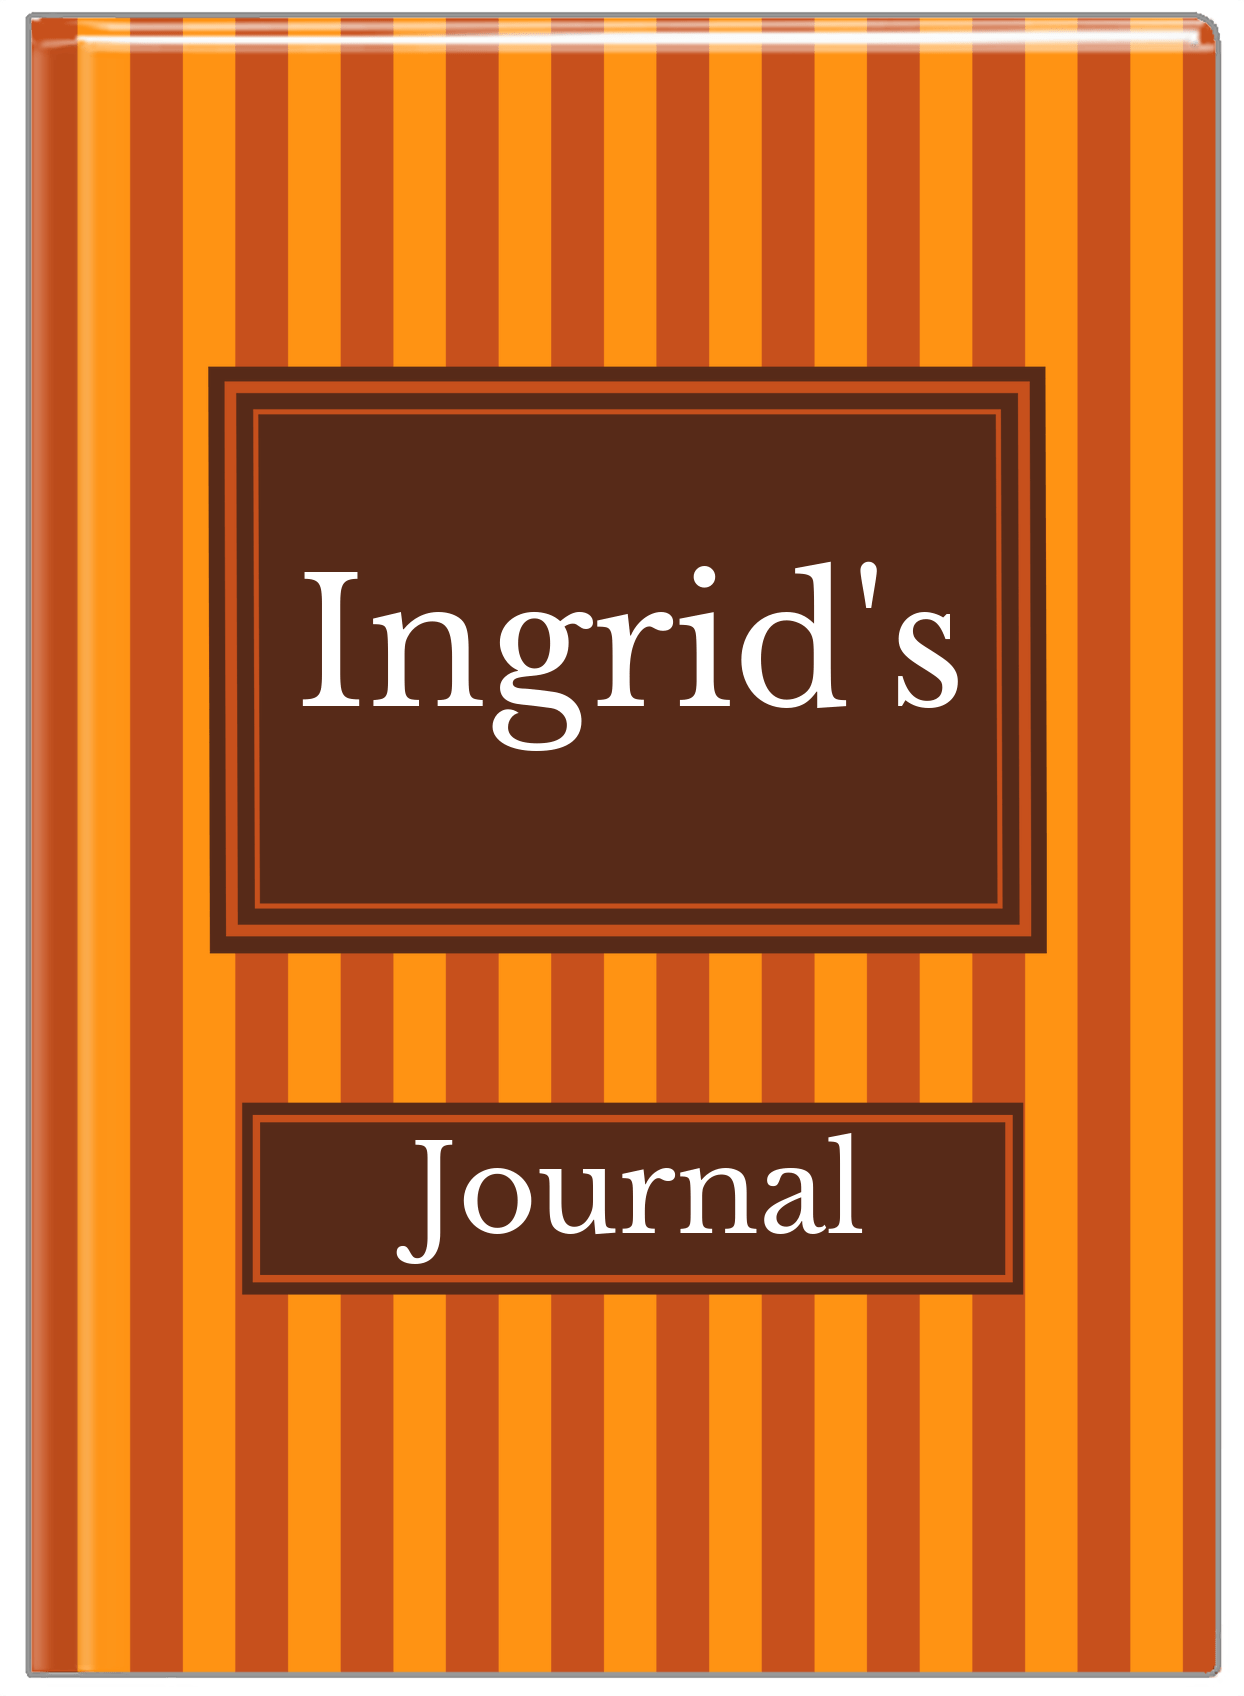 Personalized Vertical Stripes I Journal - Shades of Orange - Rectangle Nameplate - Front View